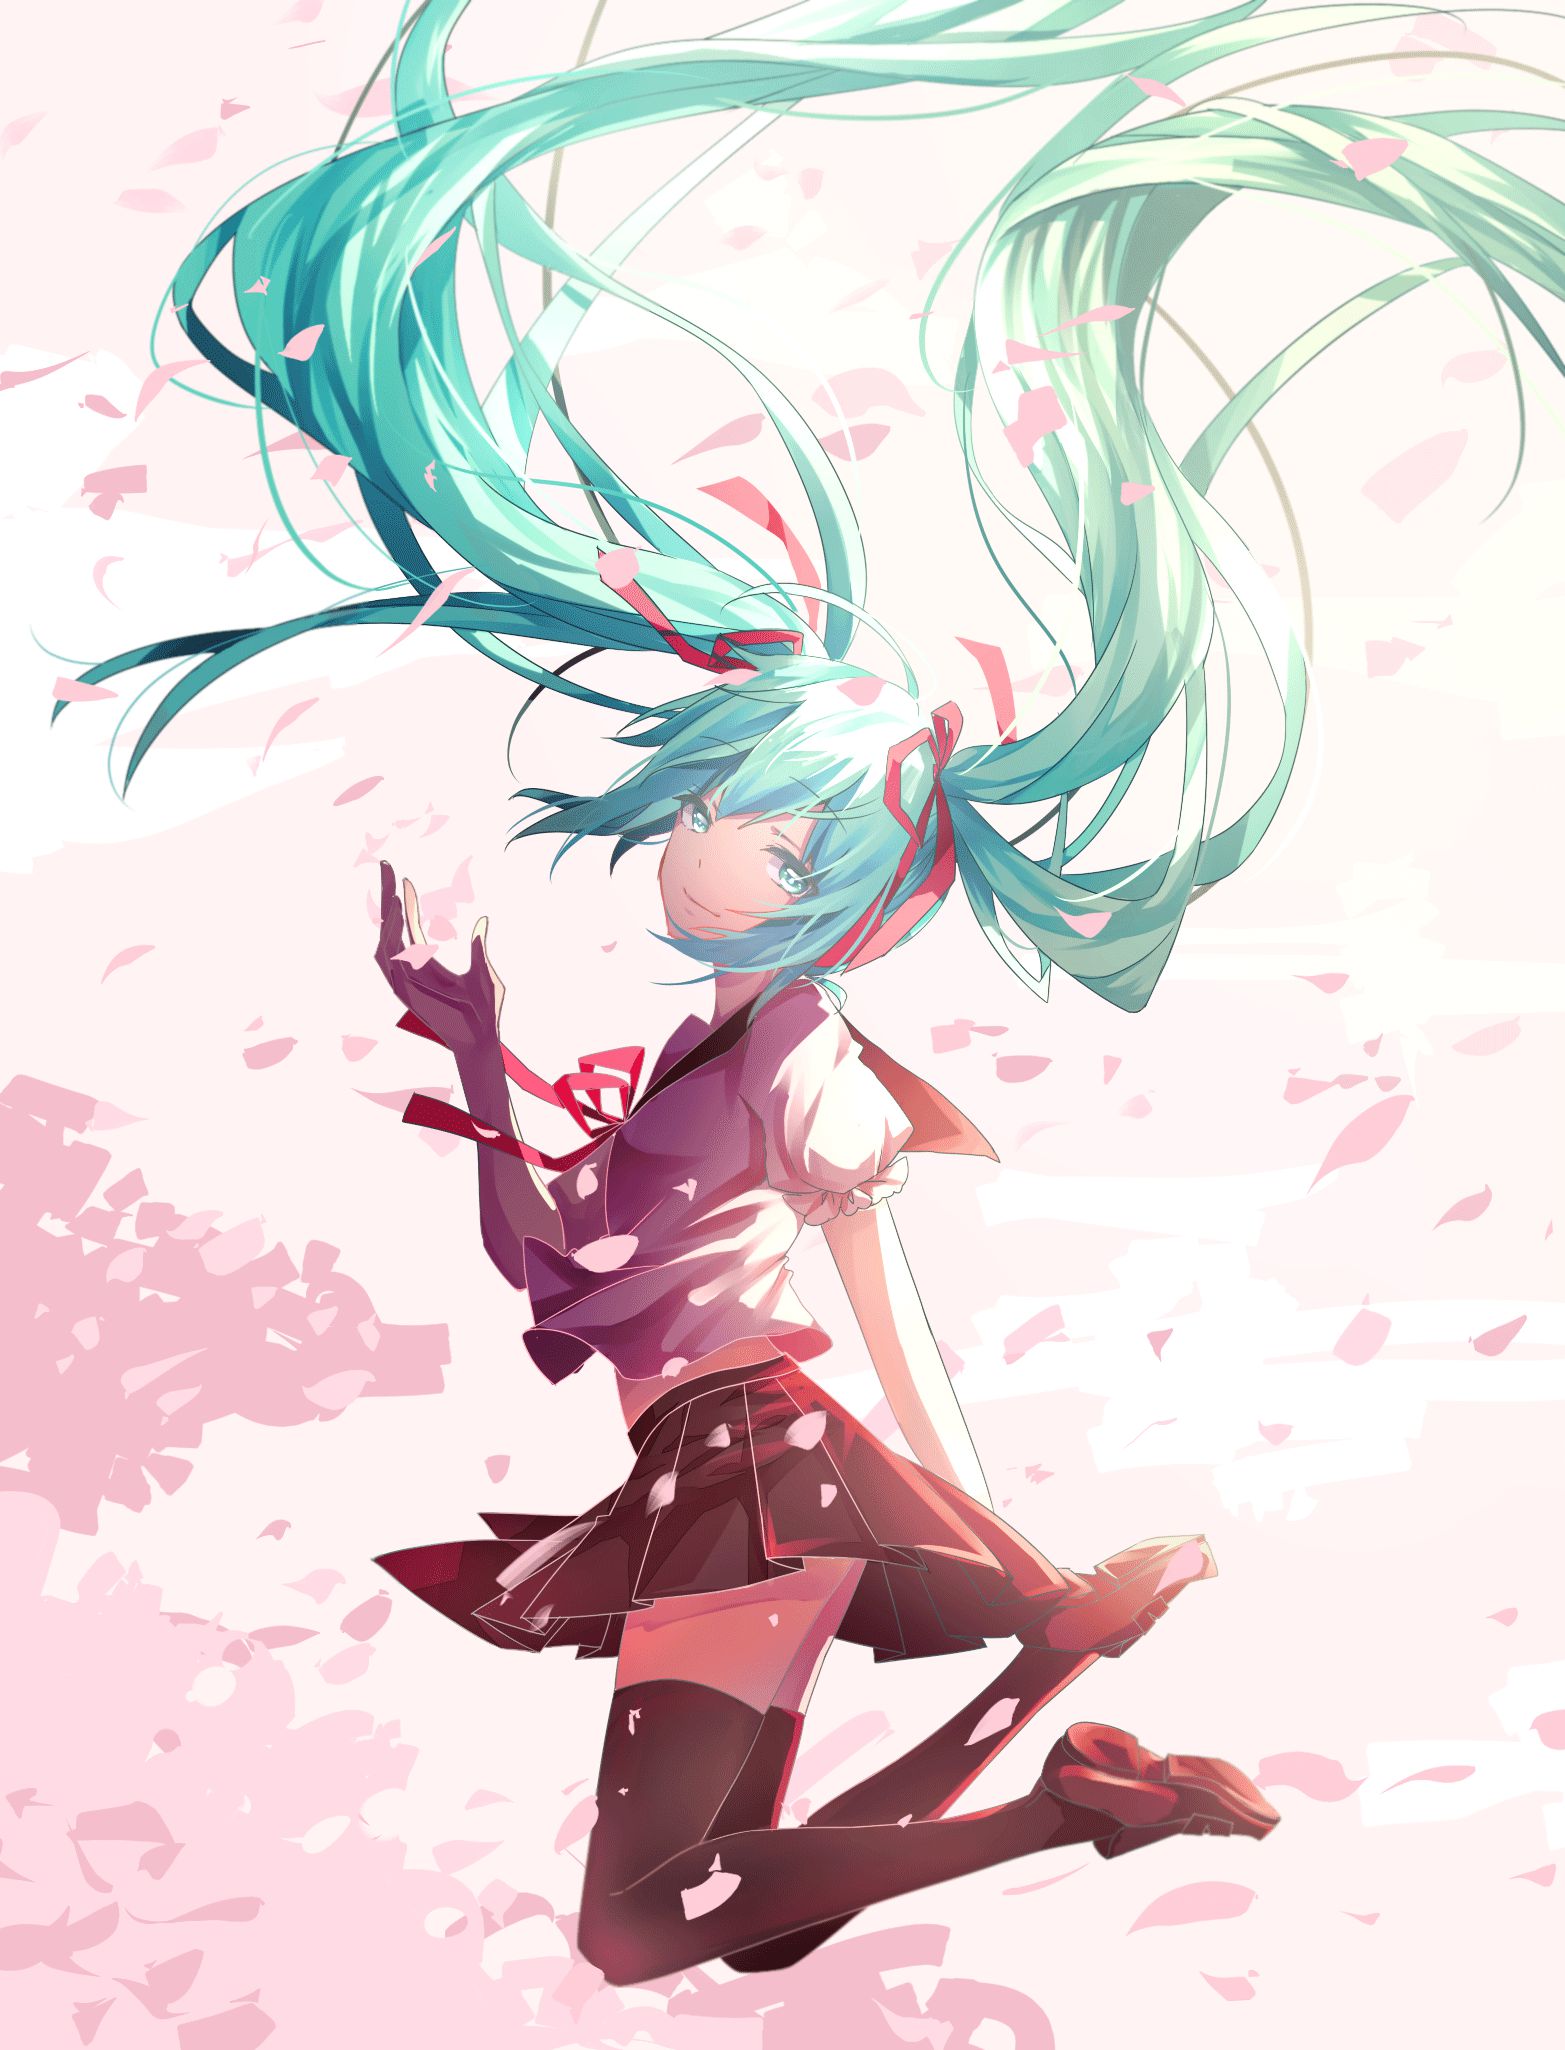 Assorted Miku images after a long absence. 27